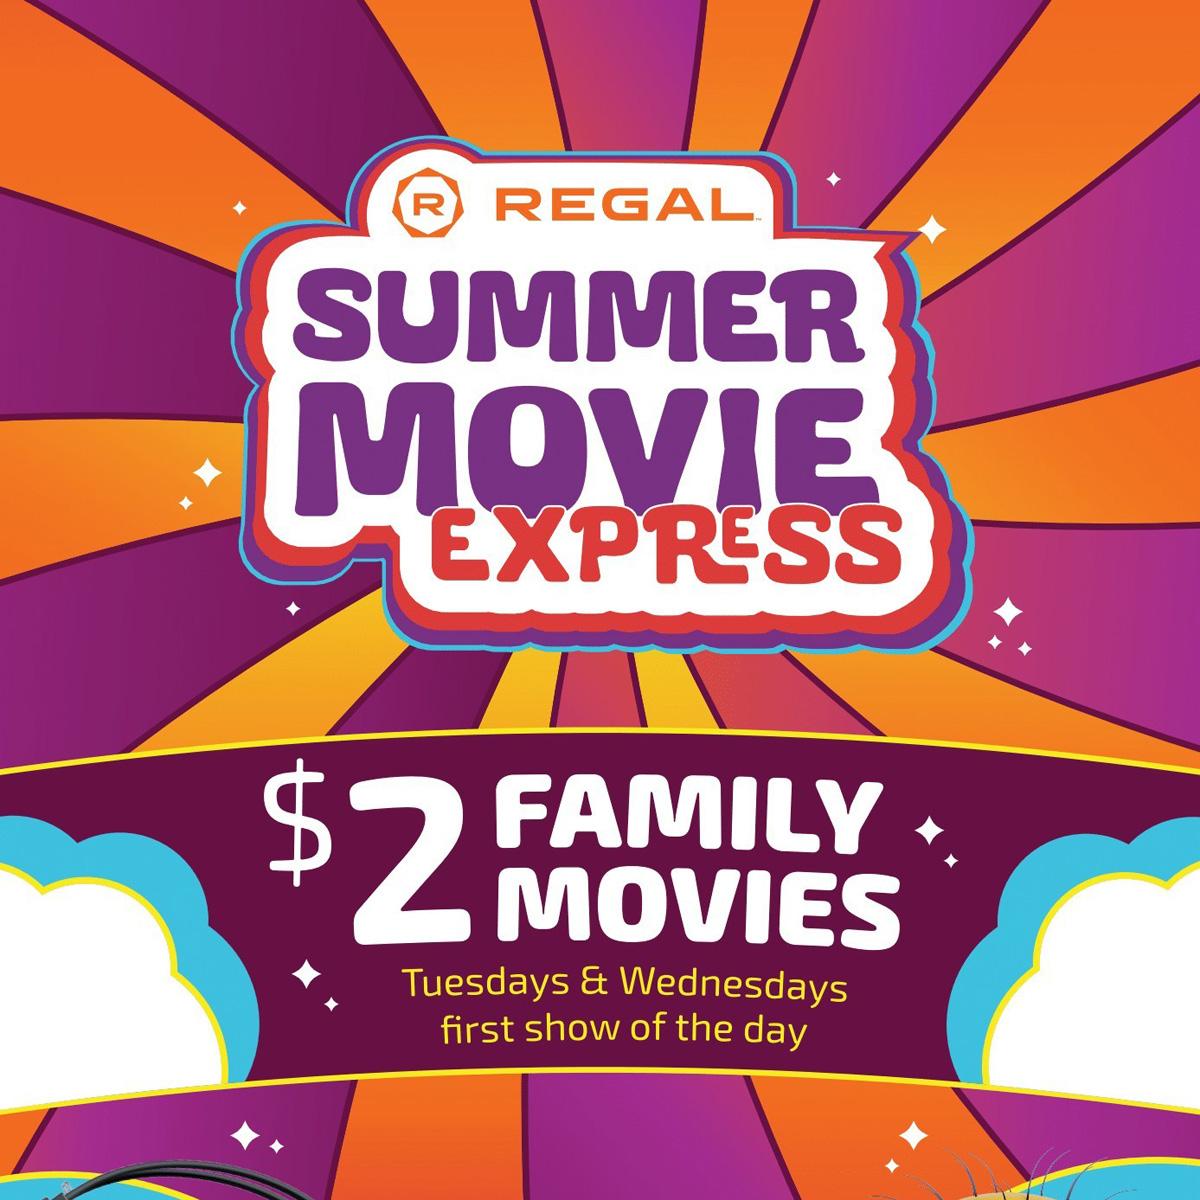 2022 Regal Summer Family Movie Express Tickets for $2